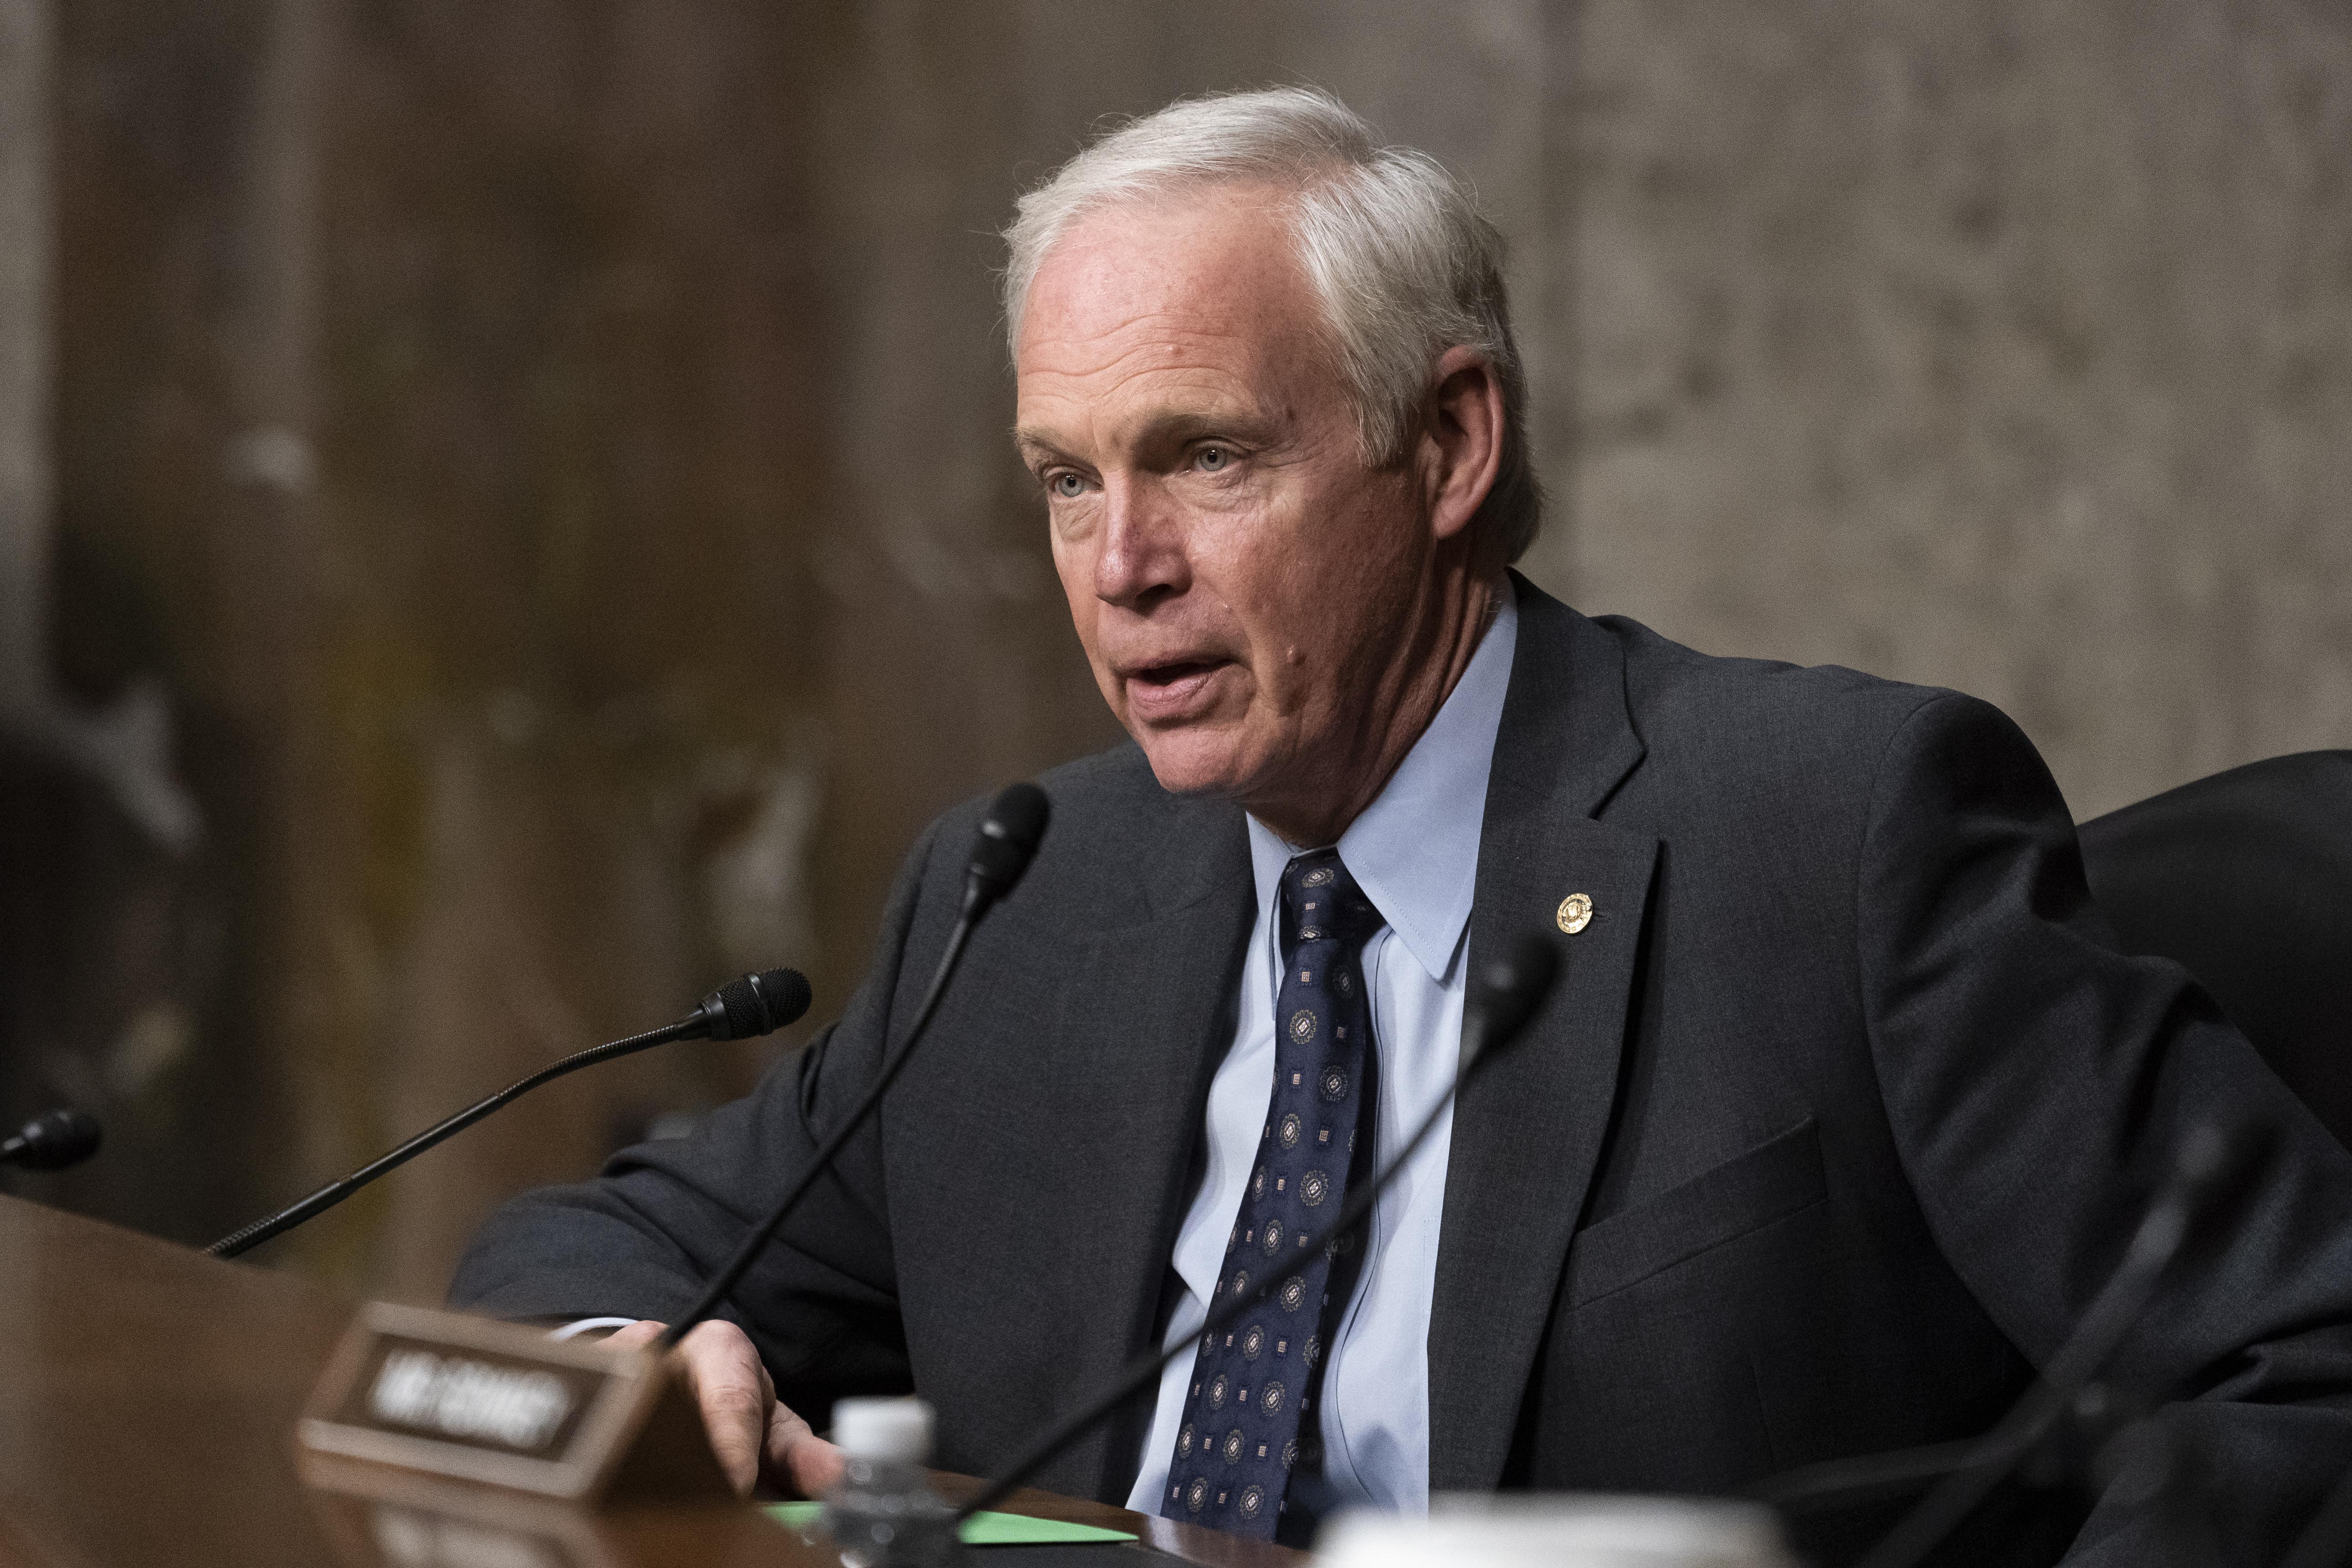 WASHINGTON, DC - DECEMBER 07: Sen. Ron Johnson (R-WI) speaks during a Senate Foreign Relations Committee hearing to examine U.S.-Russia policy at the U.S. Capitol on December 7, 2021 in Washington, DC. (Photo by Alex Brandon-Pool/Getty Images)